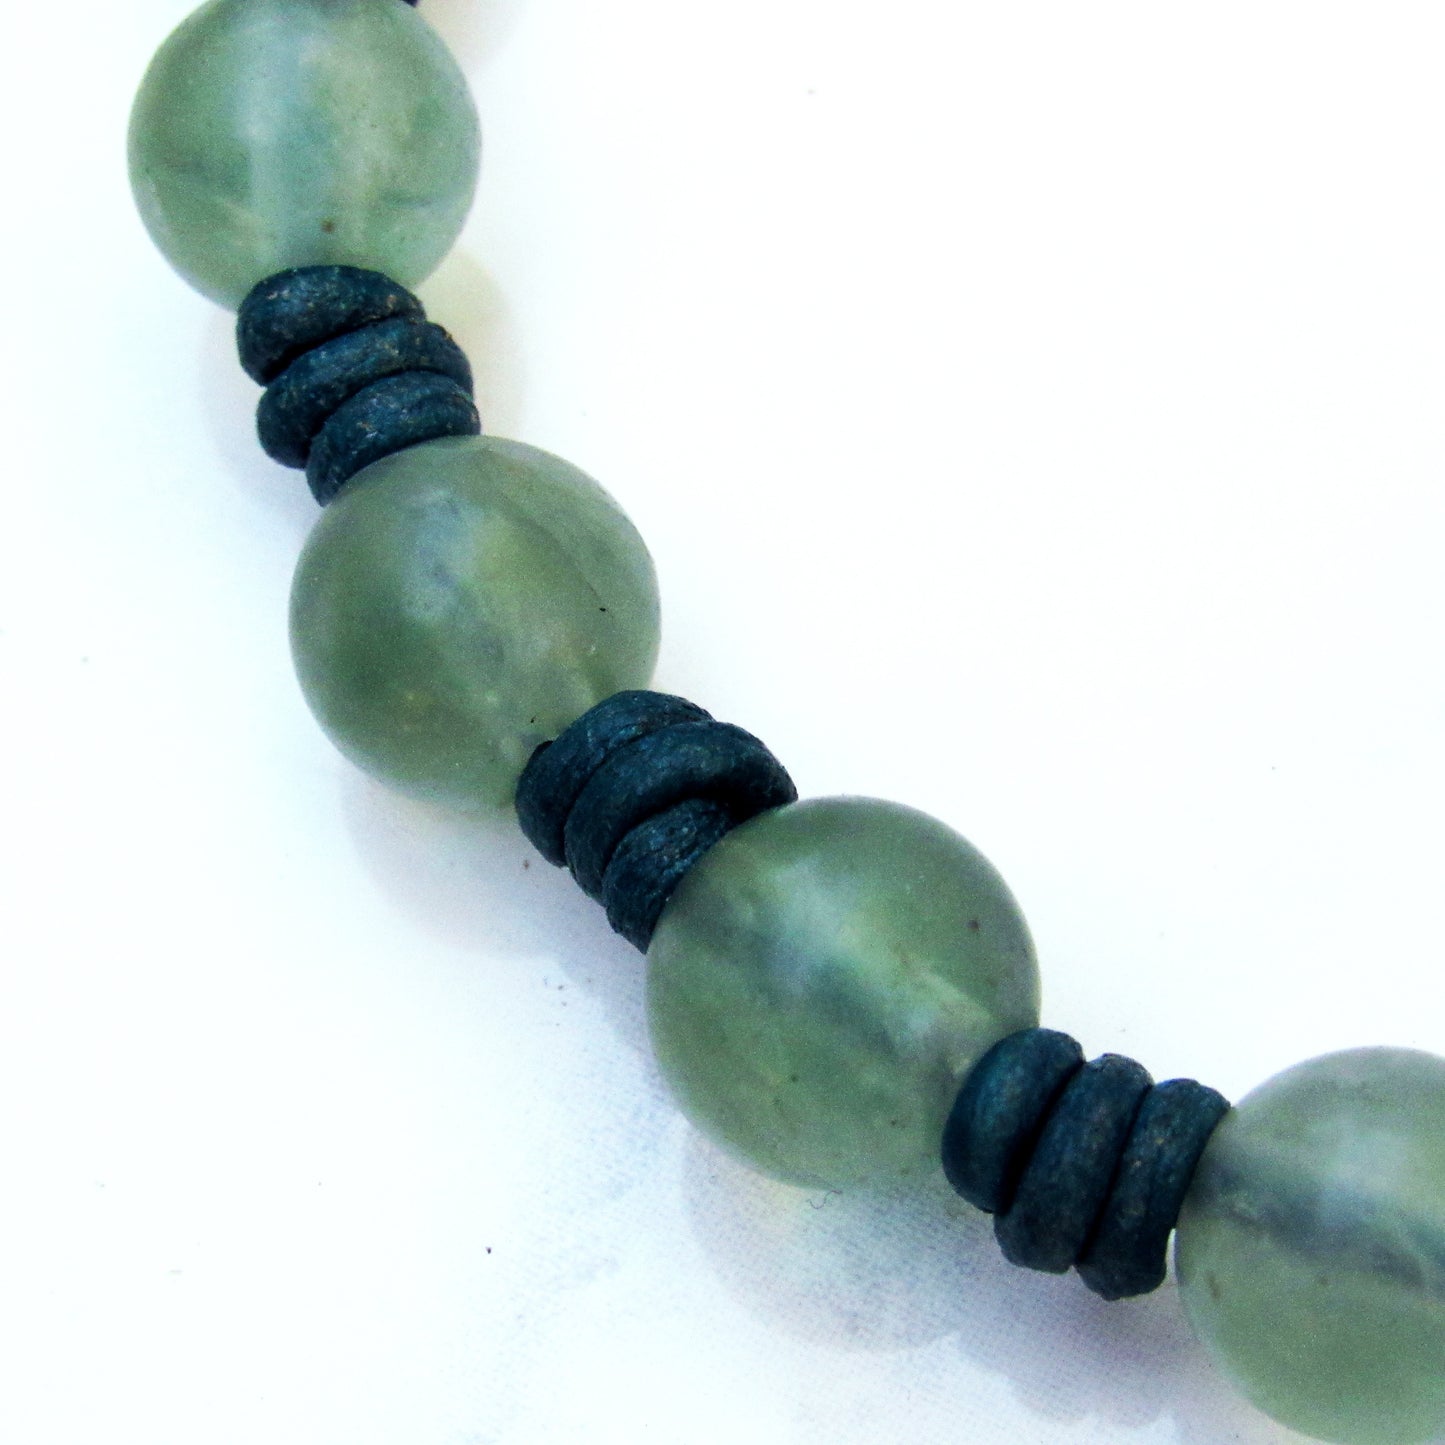 Green Leather Fluorite gemstone Hand Knotted Leather Bracelet